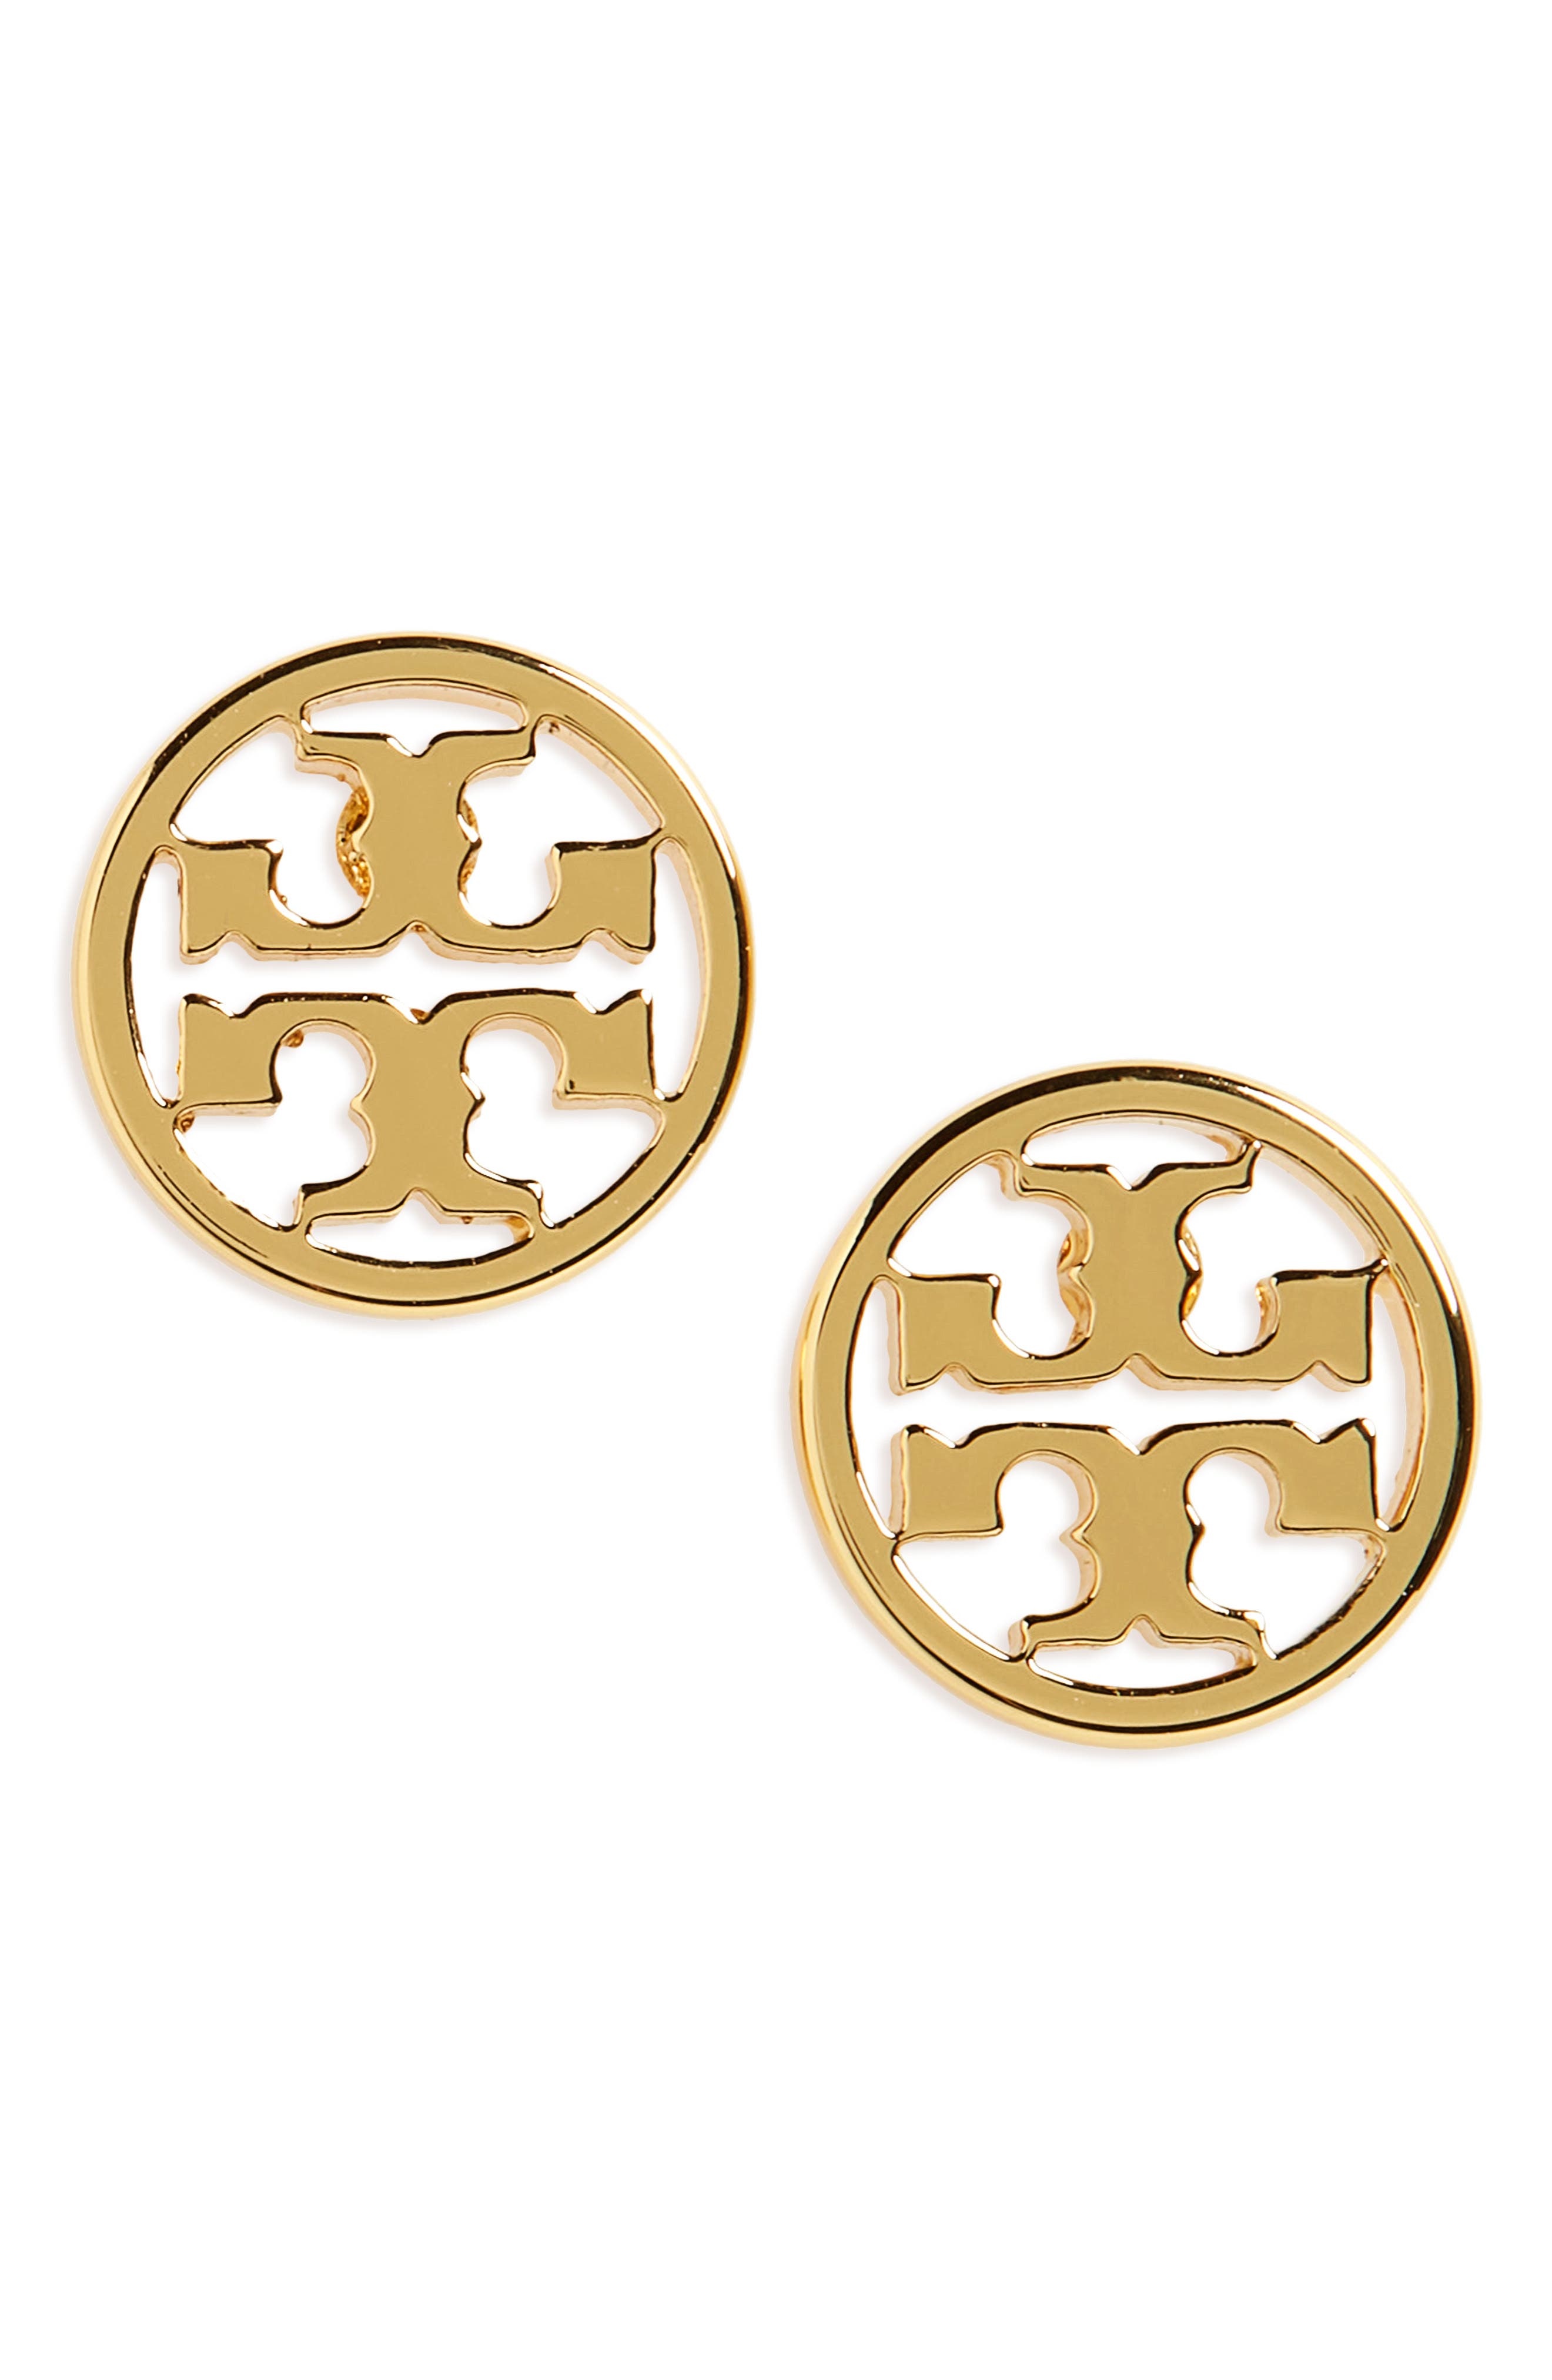 Tory Burch Circle Logo Stud Earrings in Tory Gold at Nordstrom